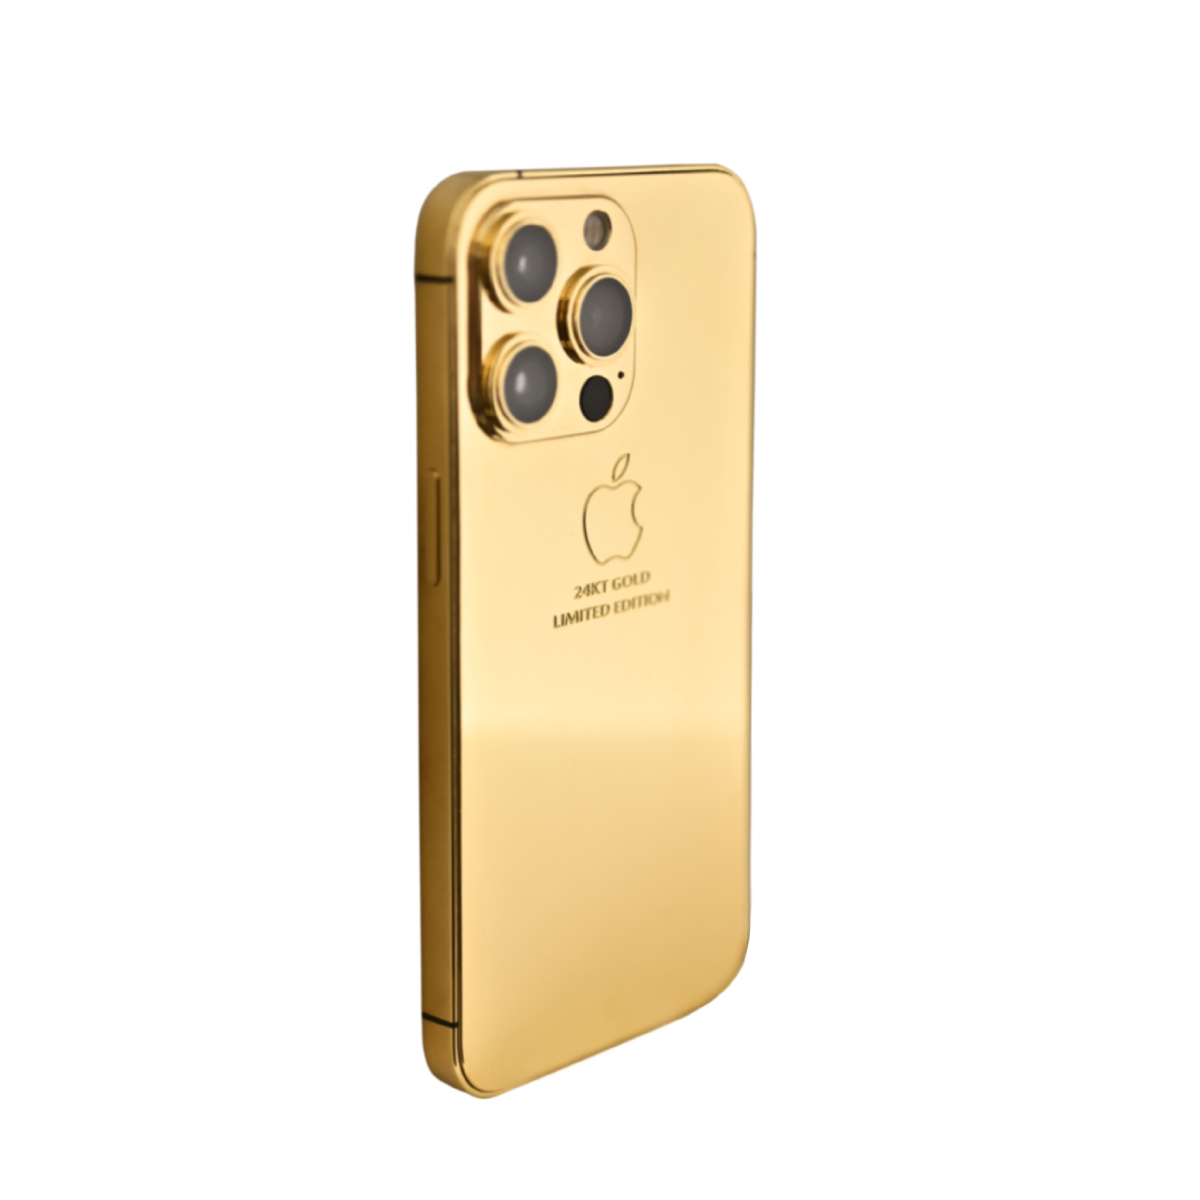 Caviar Luxury Customized iPhone 13 Pro Max 24K Full Gold Limited Edition 256GB